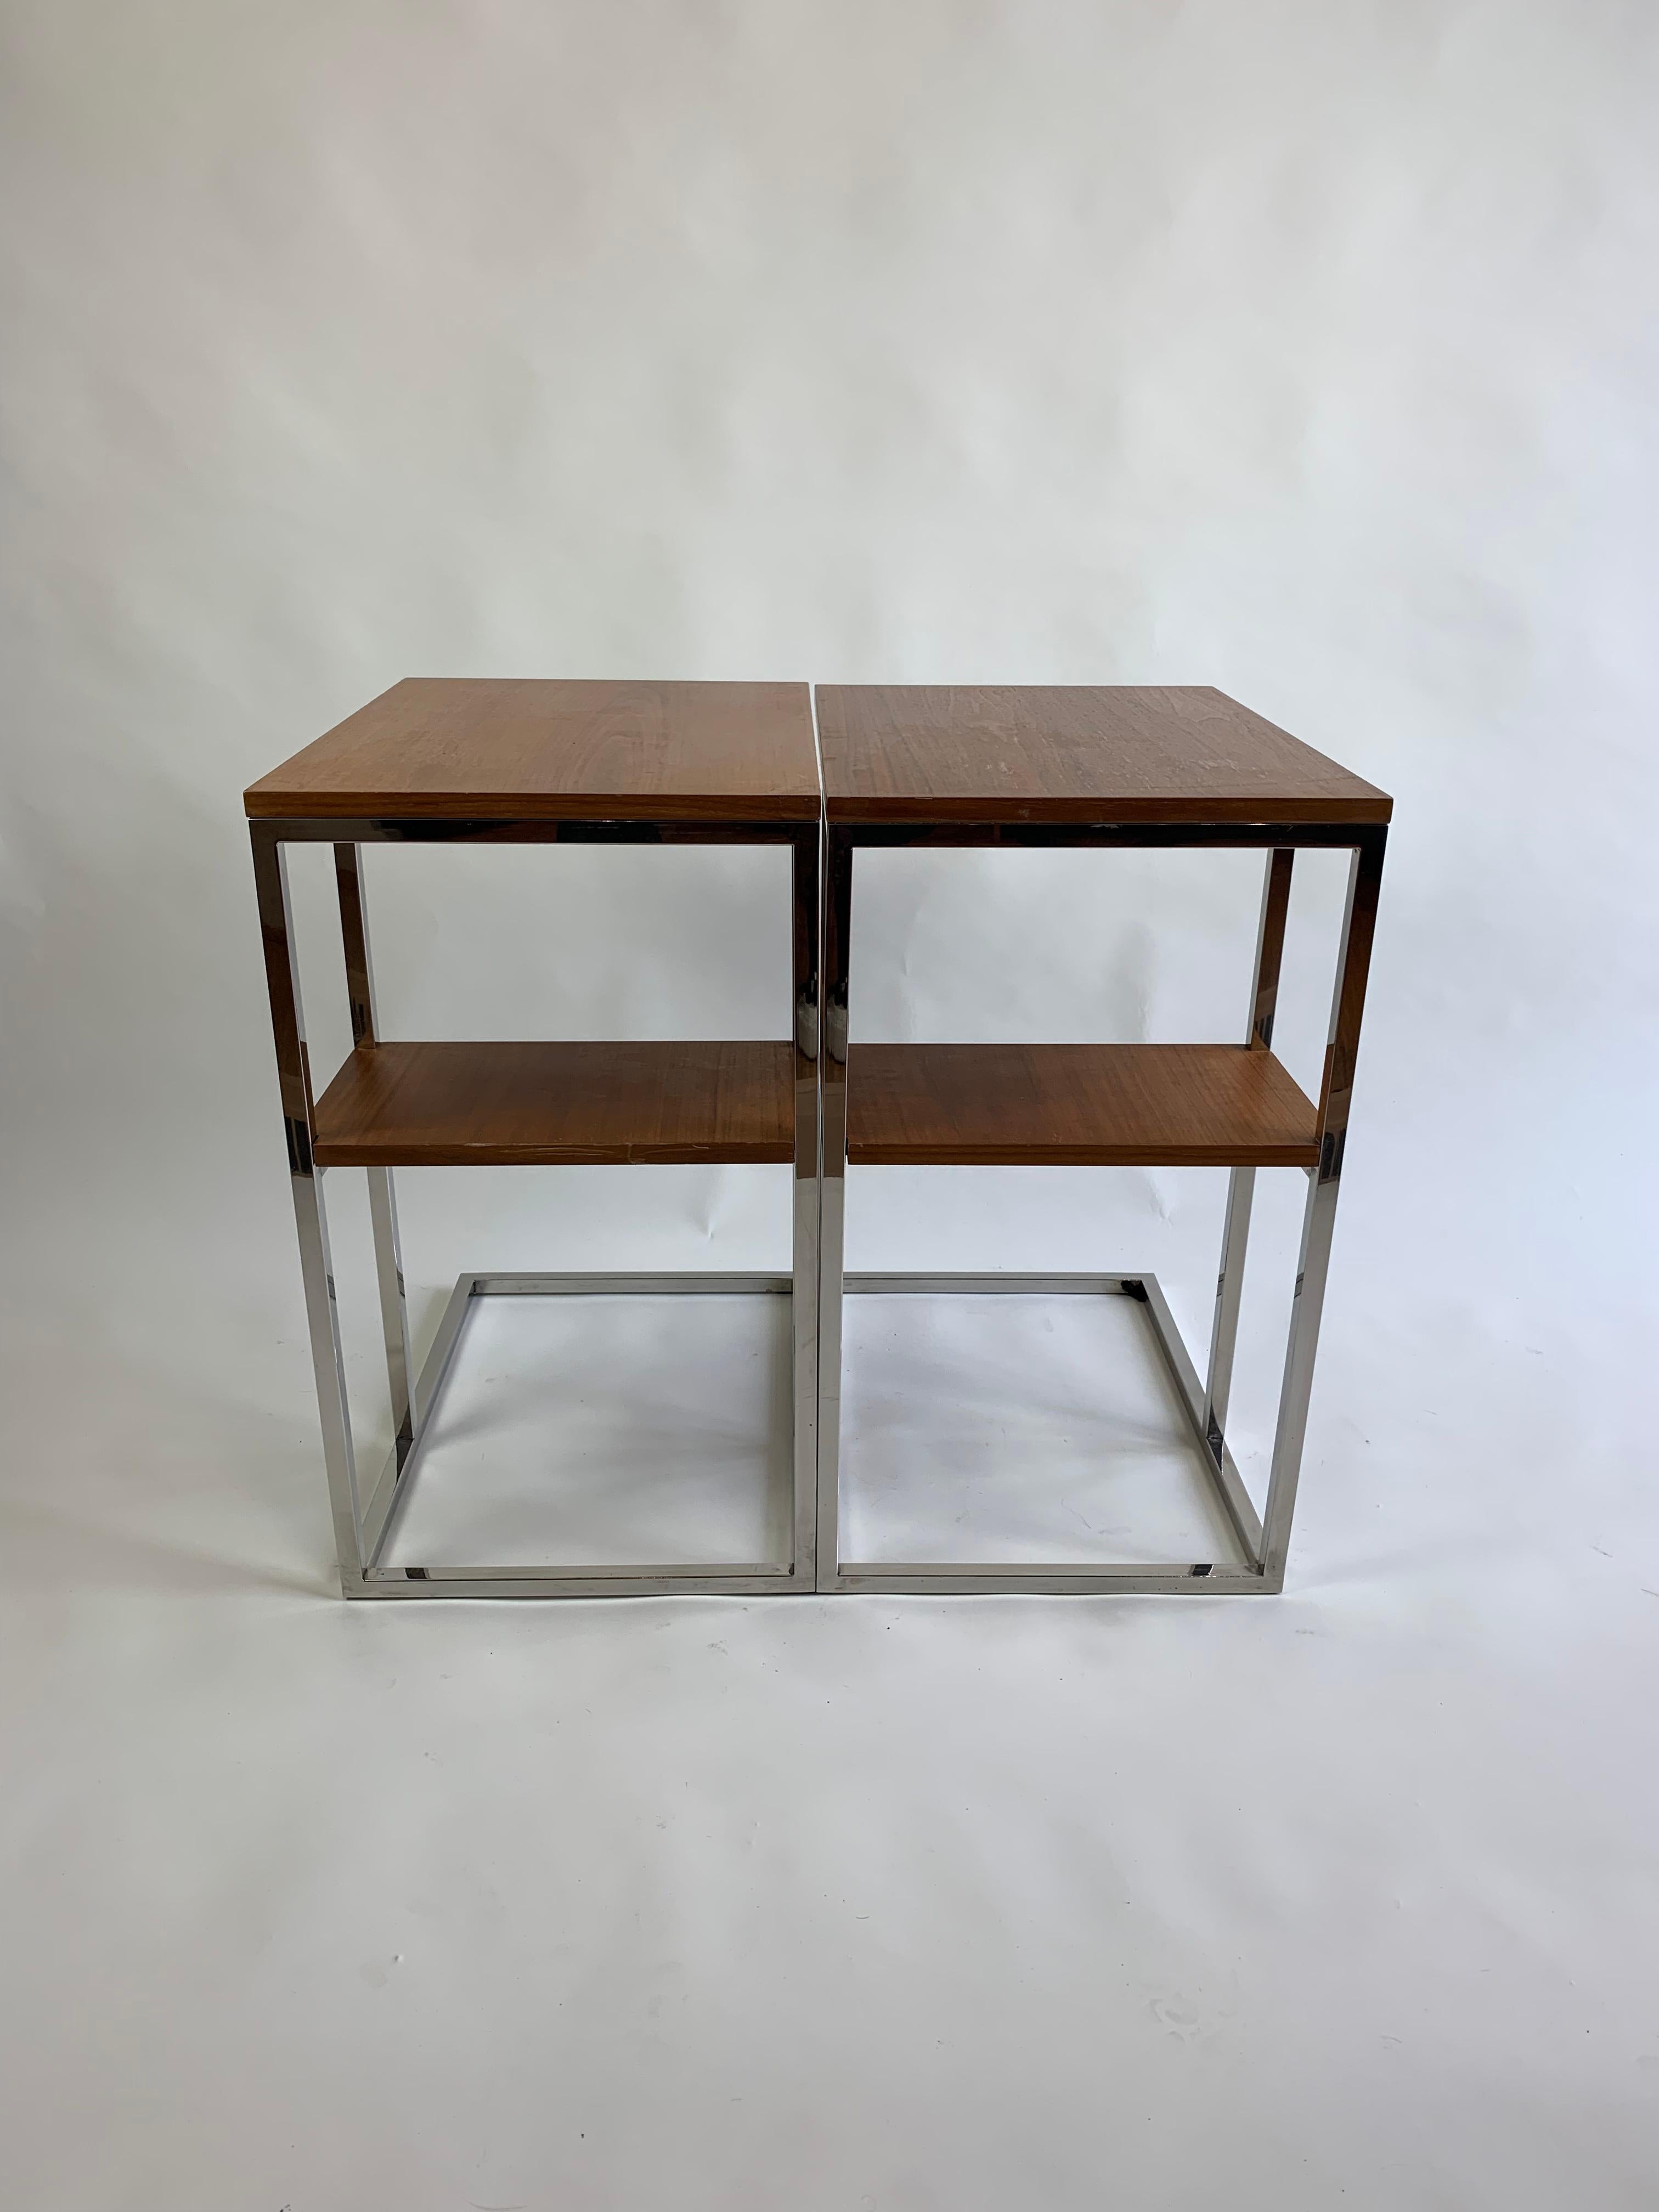 A pair of stunning midcentury Rectangular shaped side tables, in wood and chrome. Wear is consistent with age but in good condition.